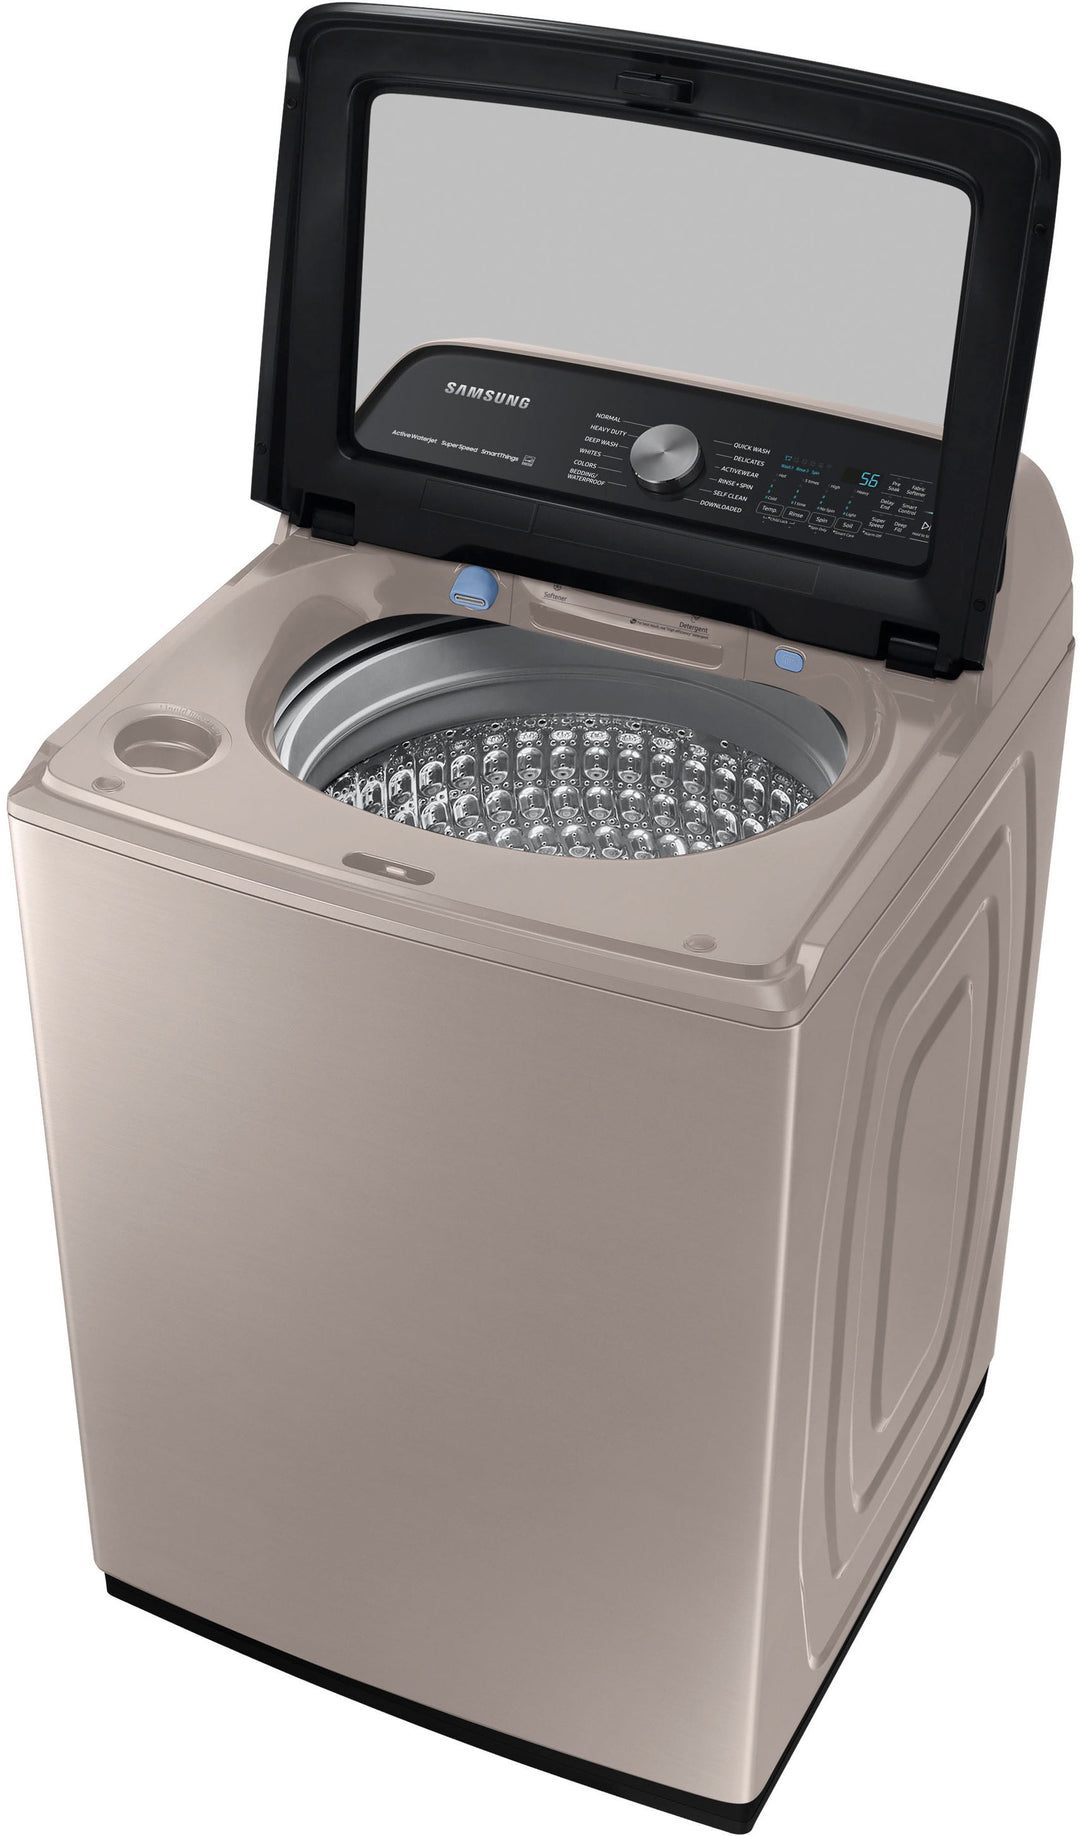 Samsung - 5.2 cu. ft. Large Capacity Smart Top Load Washer with Super Speed Wash - Champagne_7